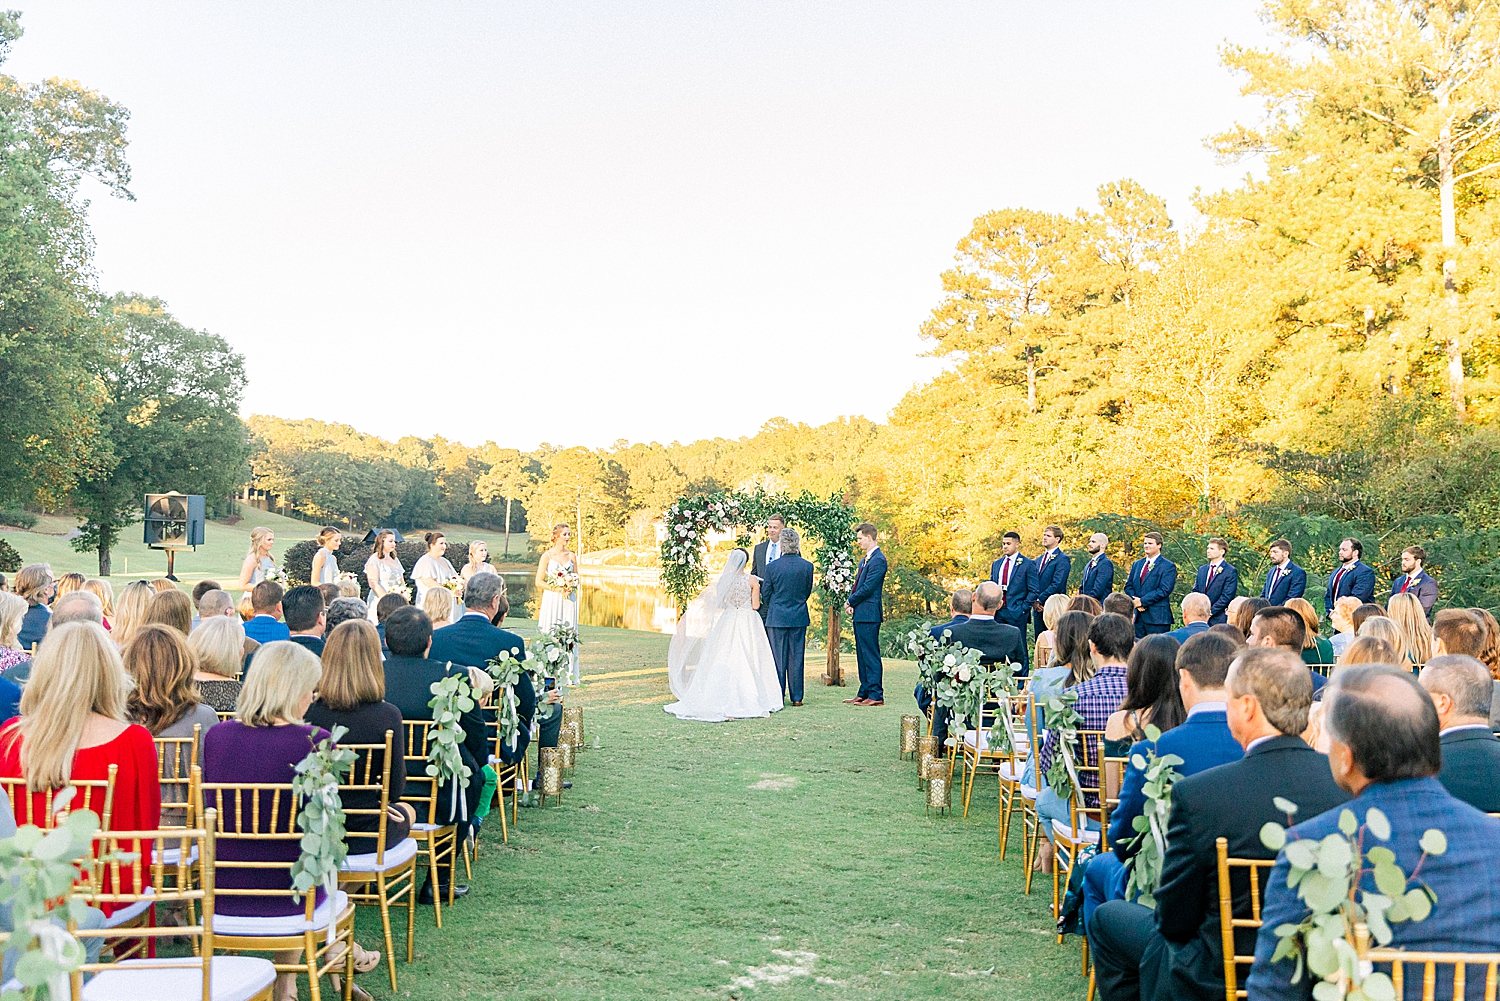 Riverchase Country Club fall wedding ceremony outdoors with floral arbor